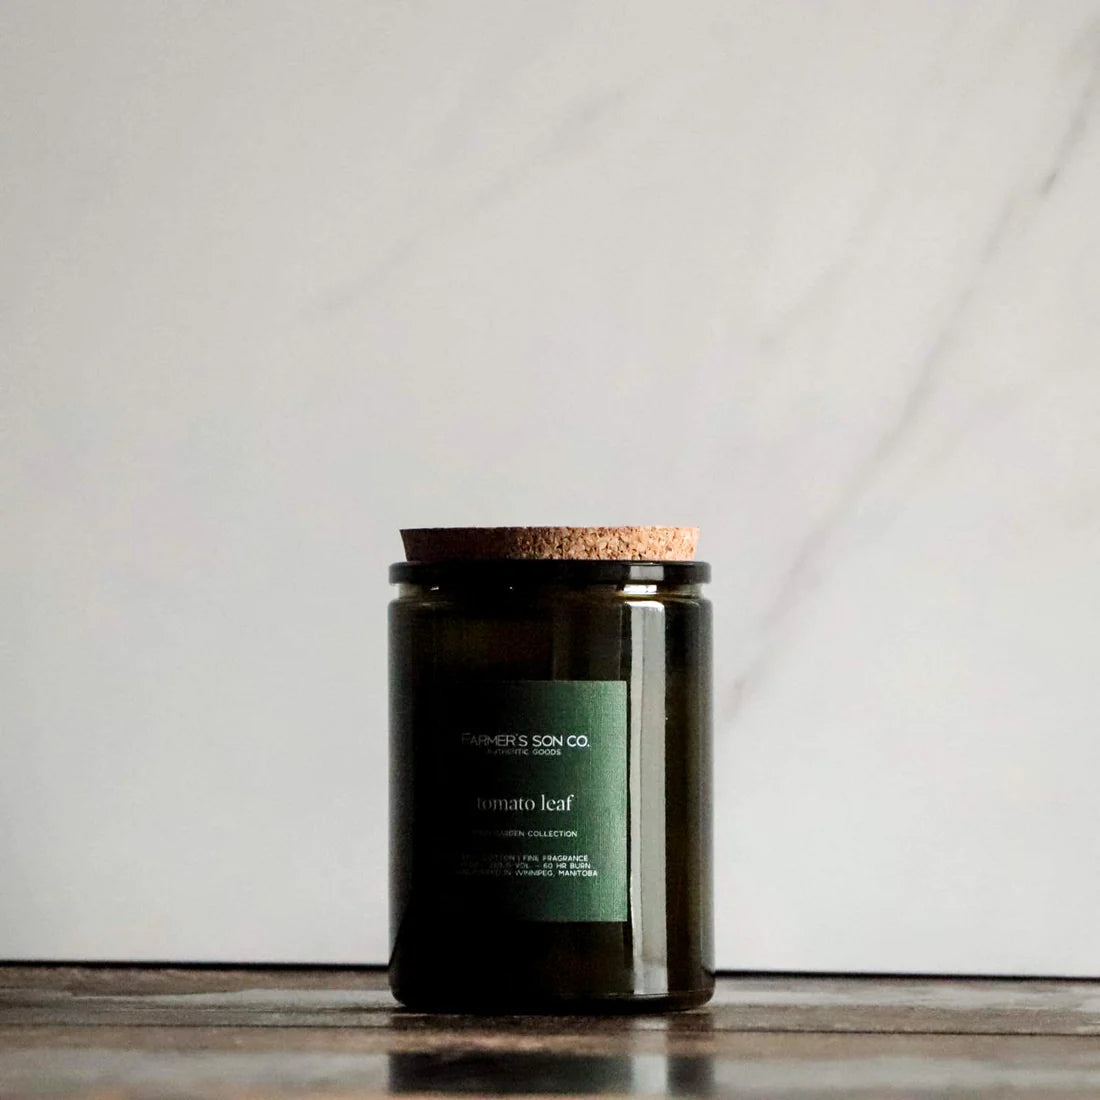 Tomato Leaf Candle by Farmer's Son